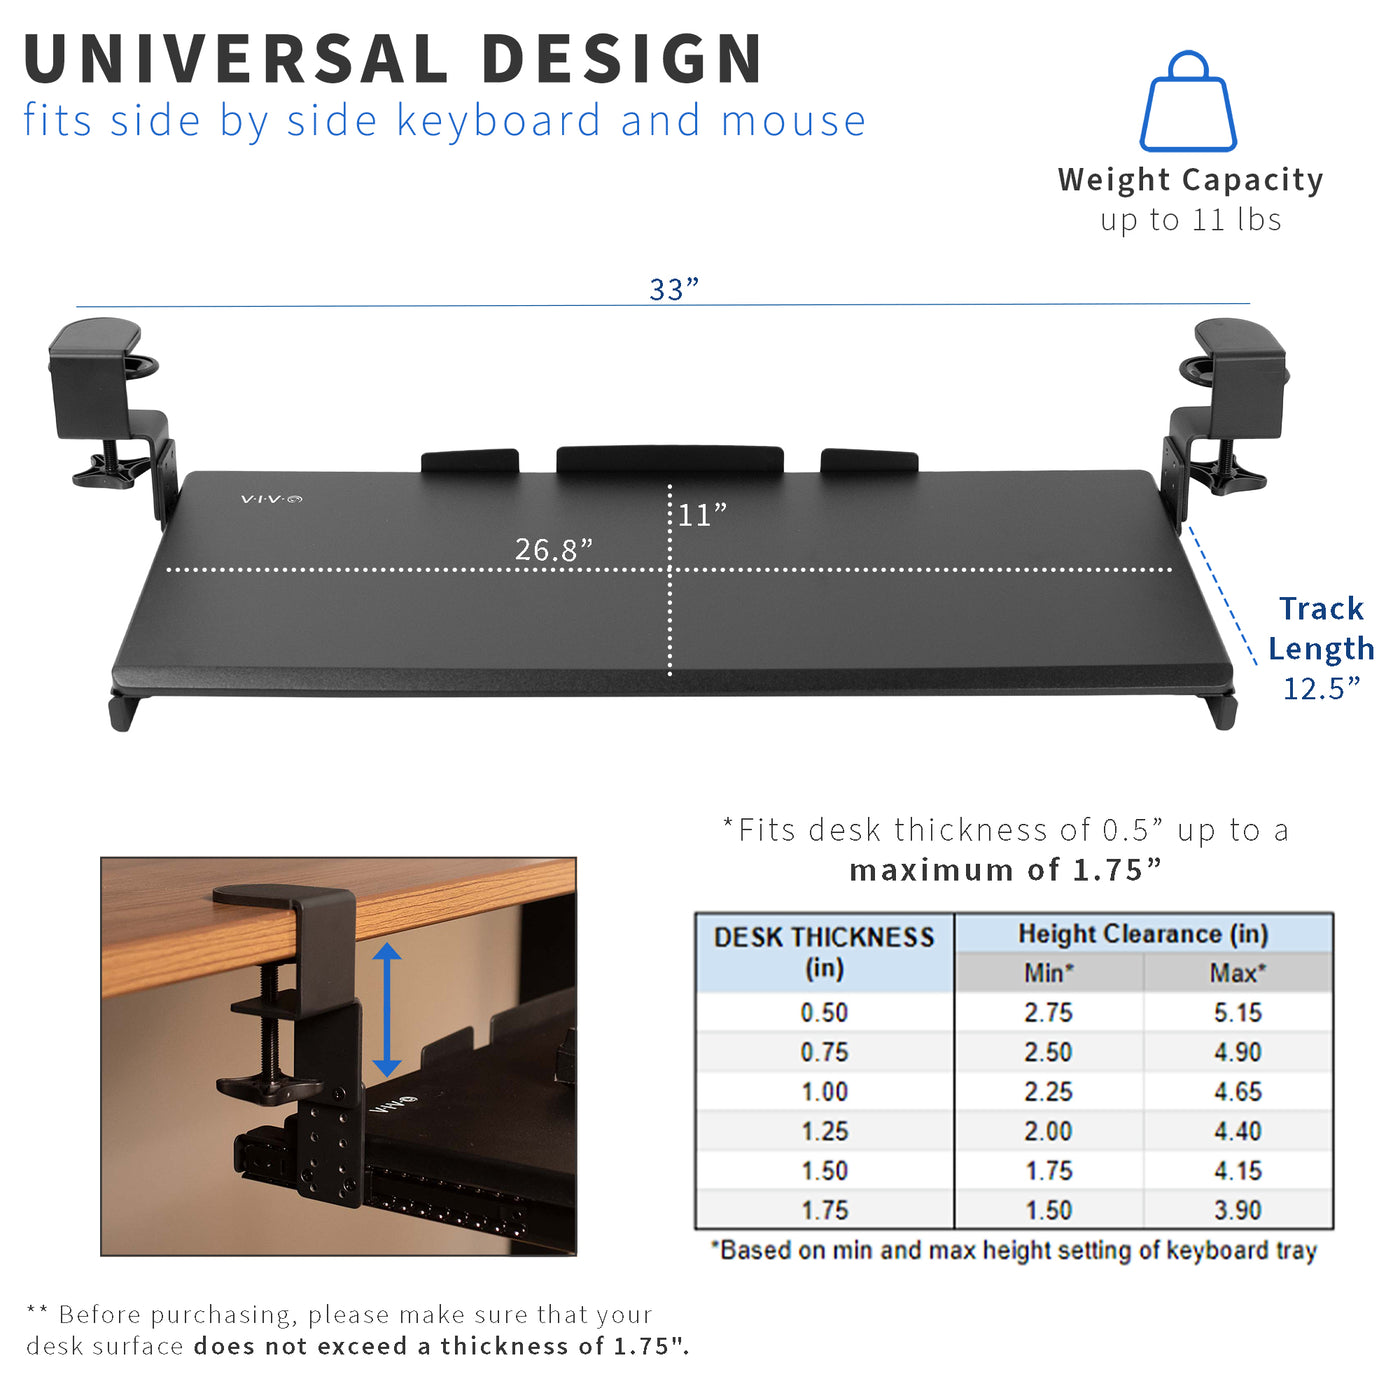 Universal design to fit most desktops on the market with calculated clearance.